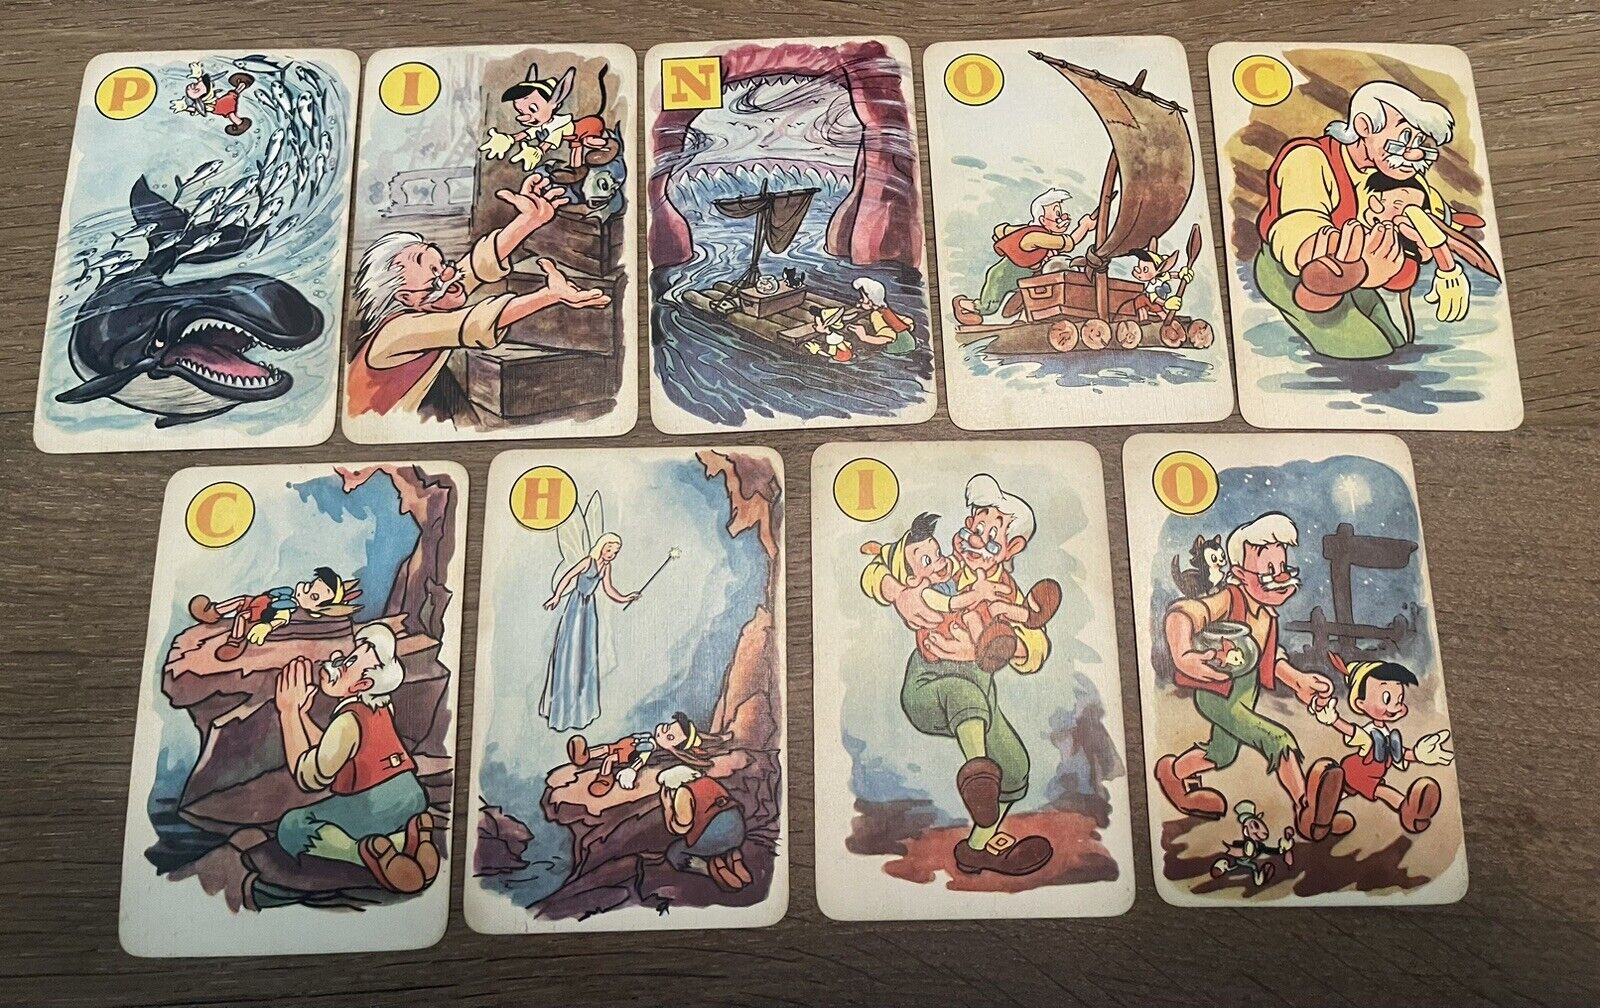 Walt Disney Films 1940 Castell Pinocchio Card Game Cards Colored Set Of 9 Cards